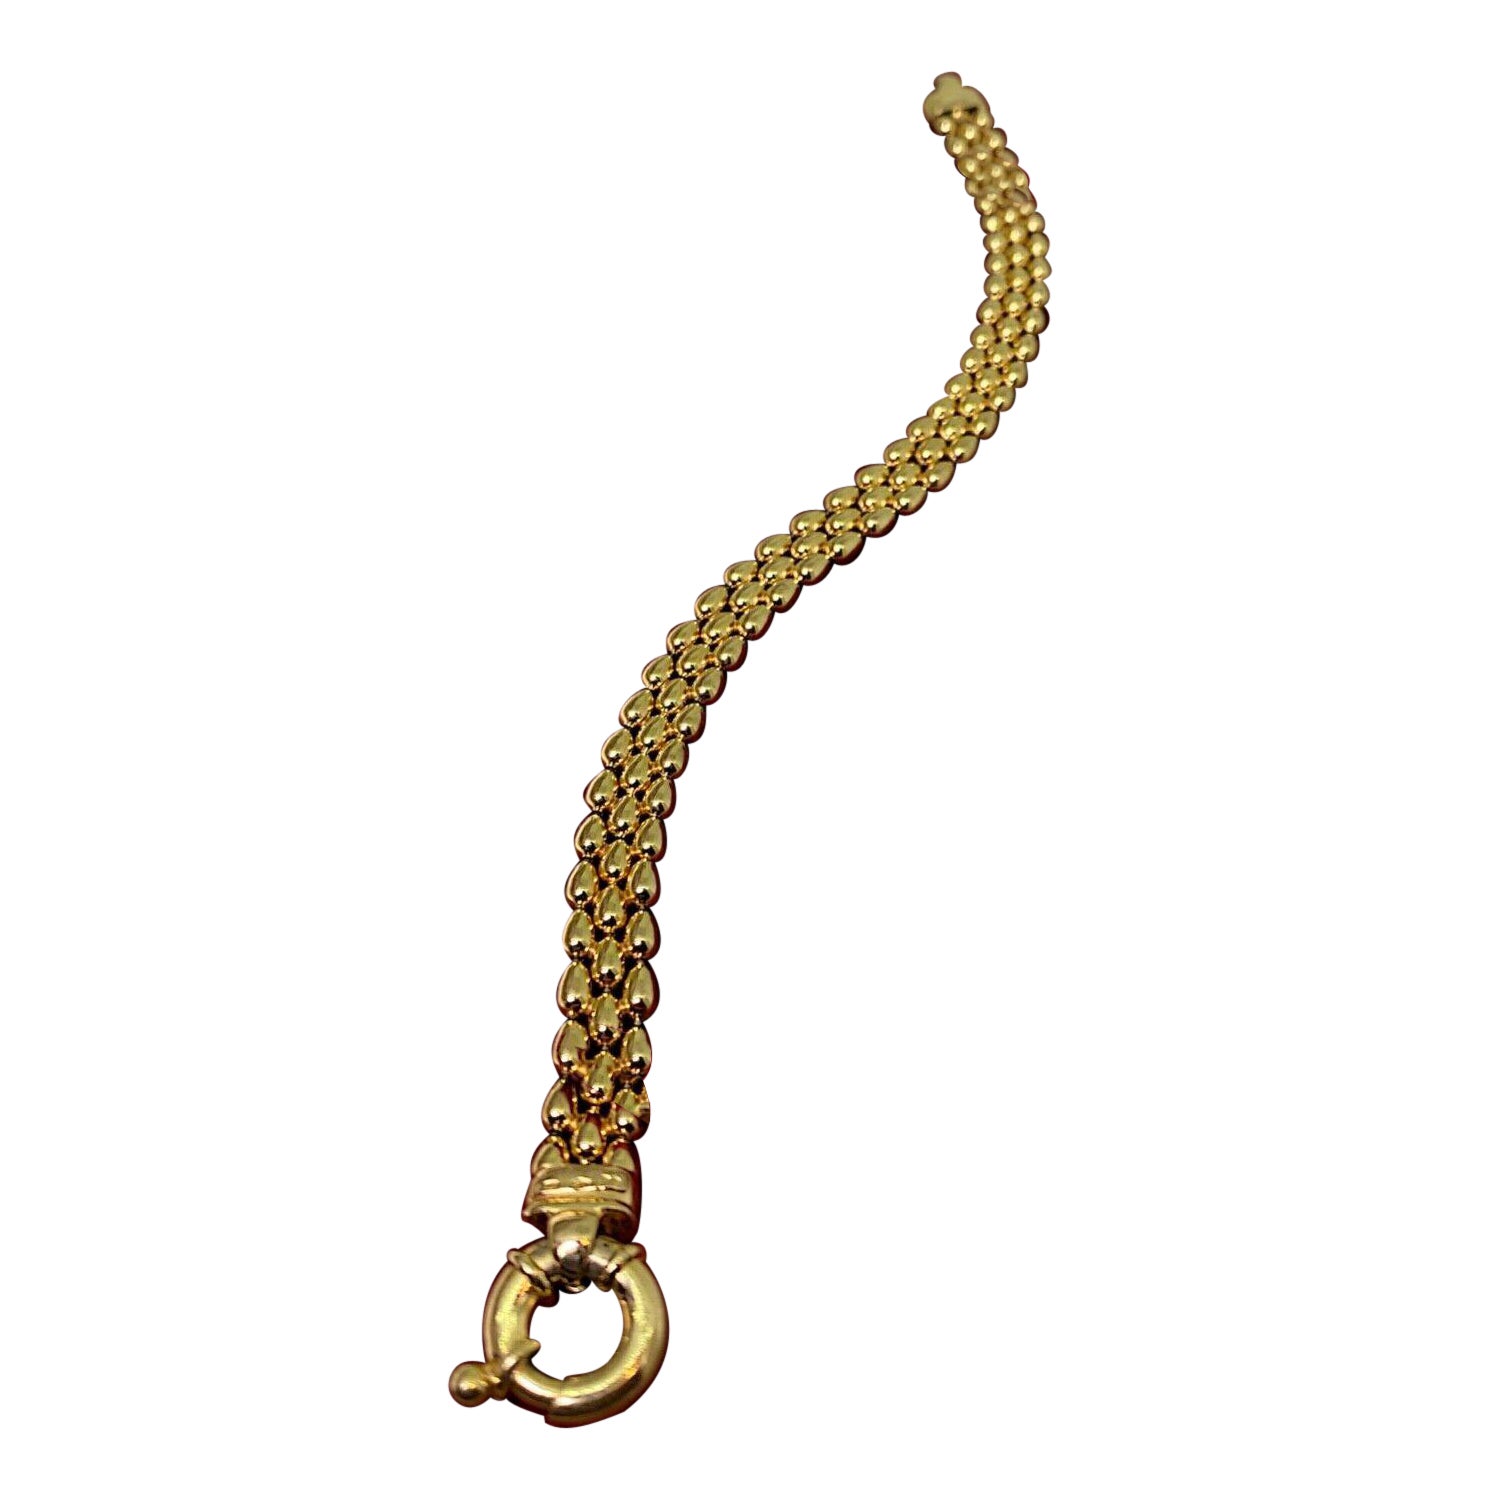 Superb 9Kt Yellow Gold Italian Panther Link Bracelet, c2000s. Mint Condition. For Sale